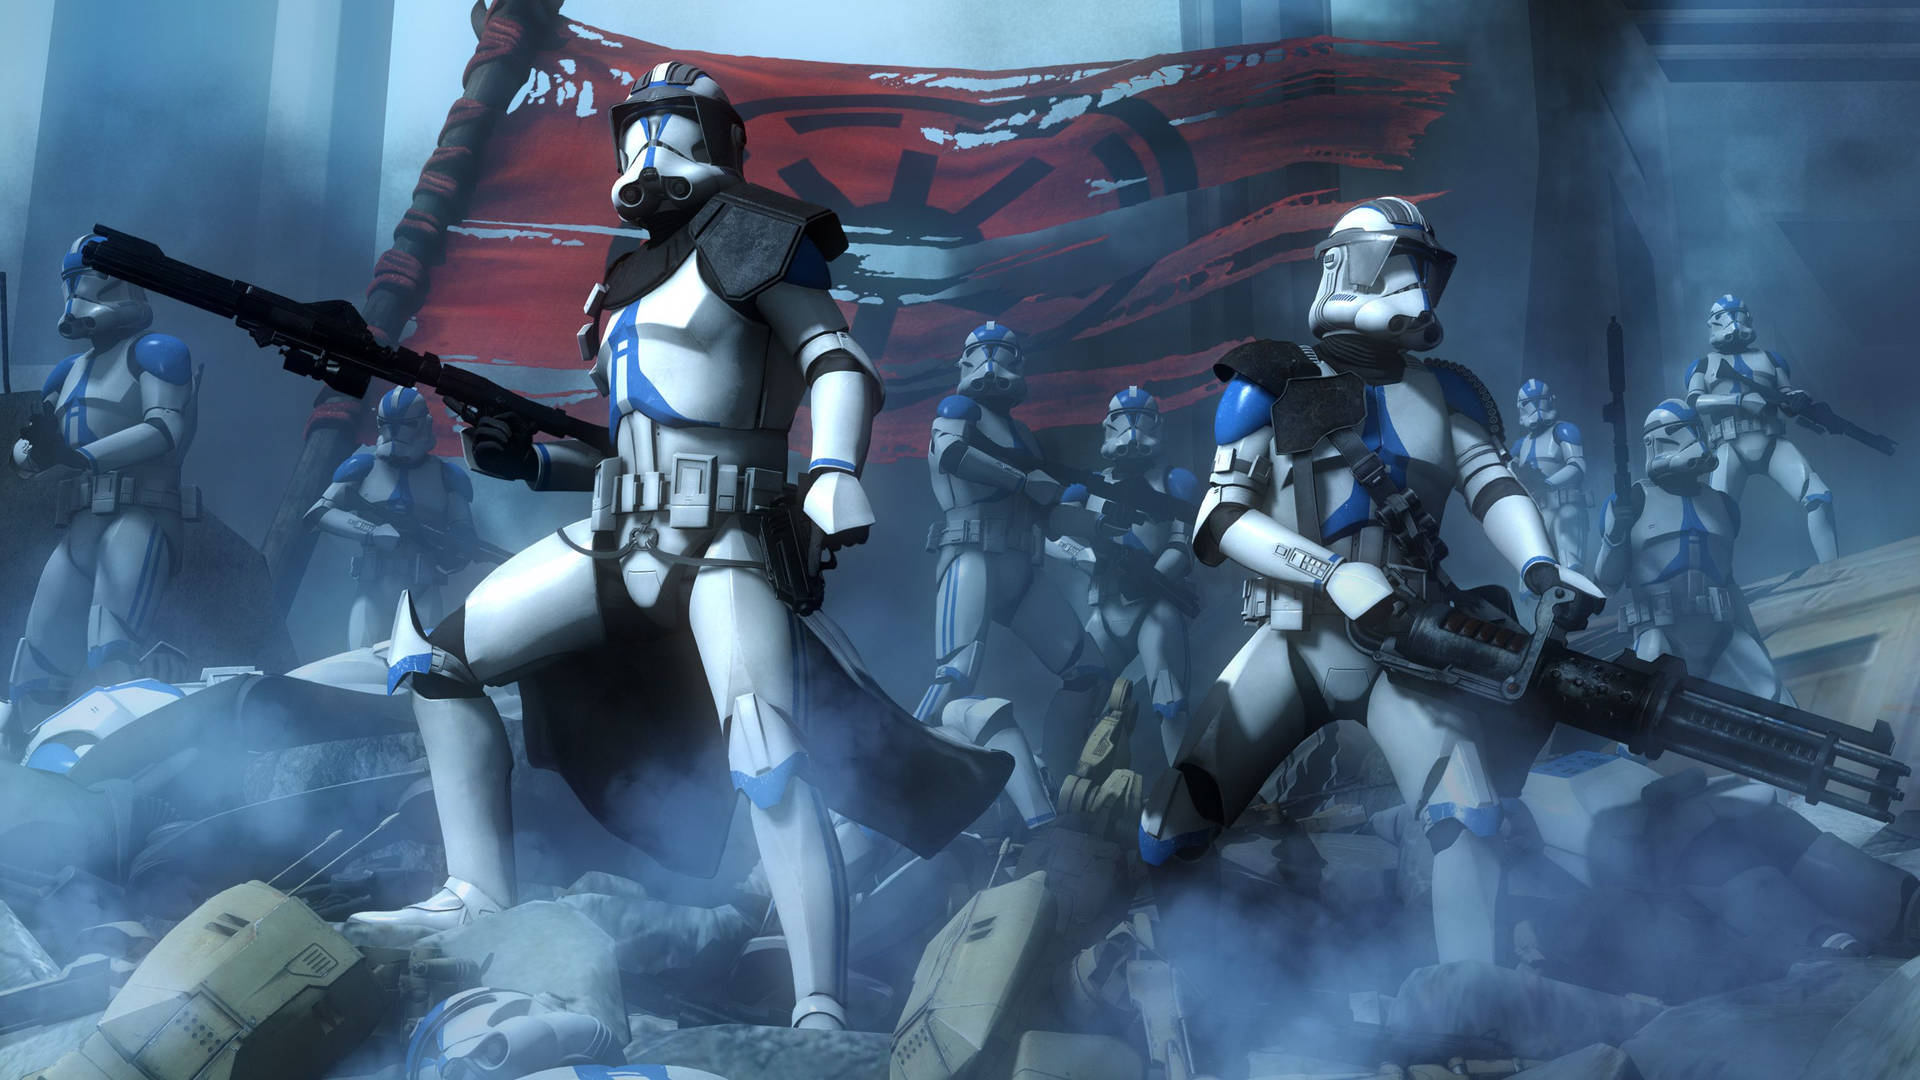 Clone Troopers march into Battle Wallpaper